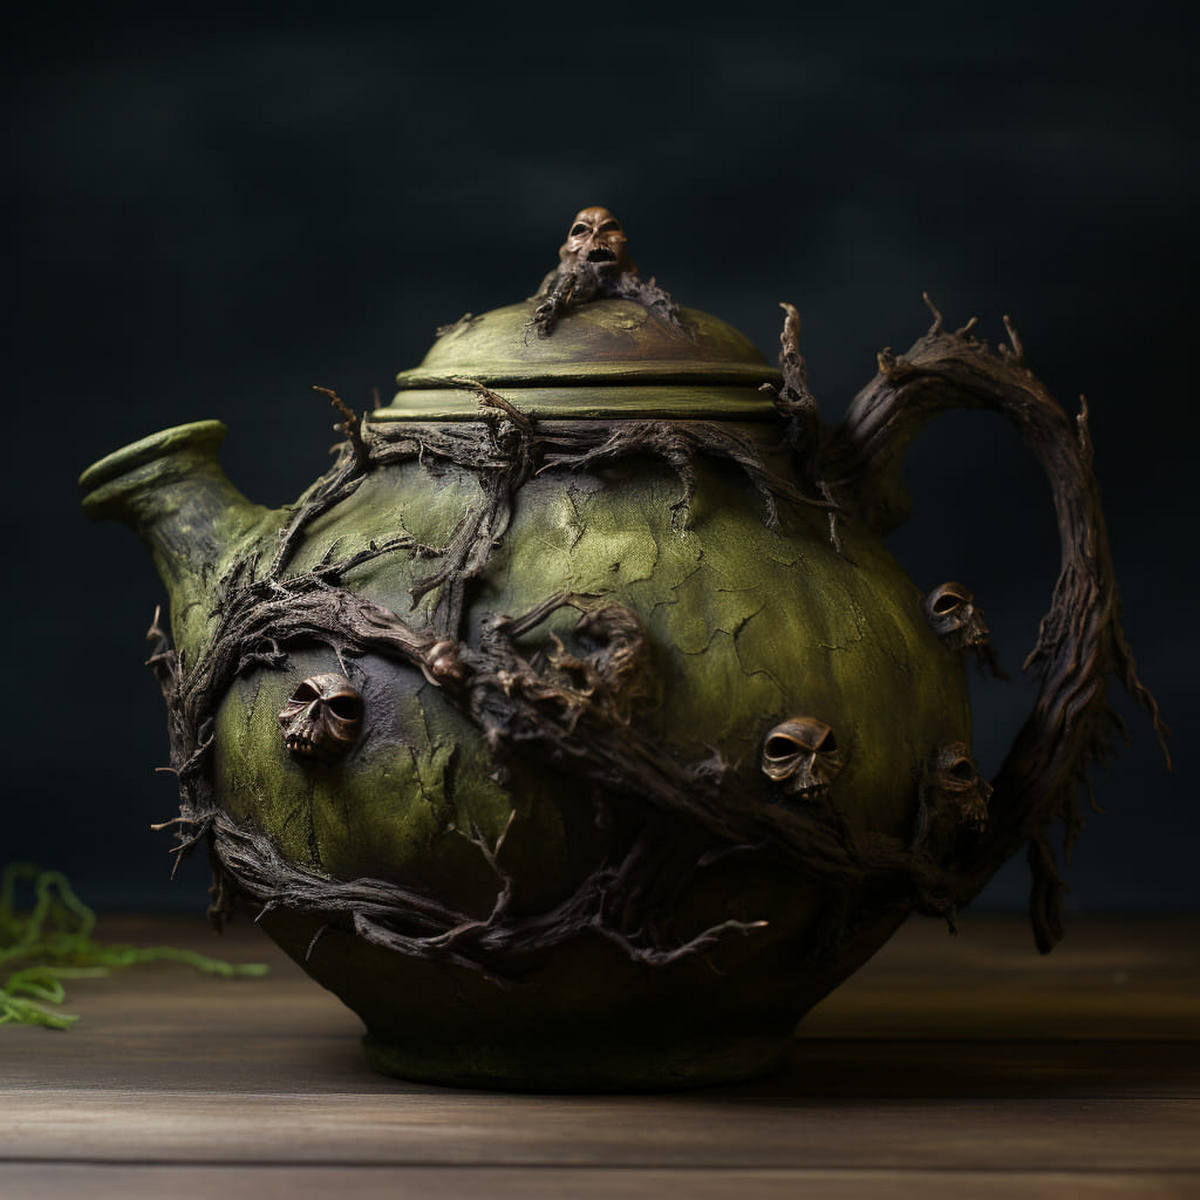 Creating Iconic Halloween Teapots in New England Goblins